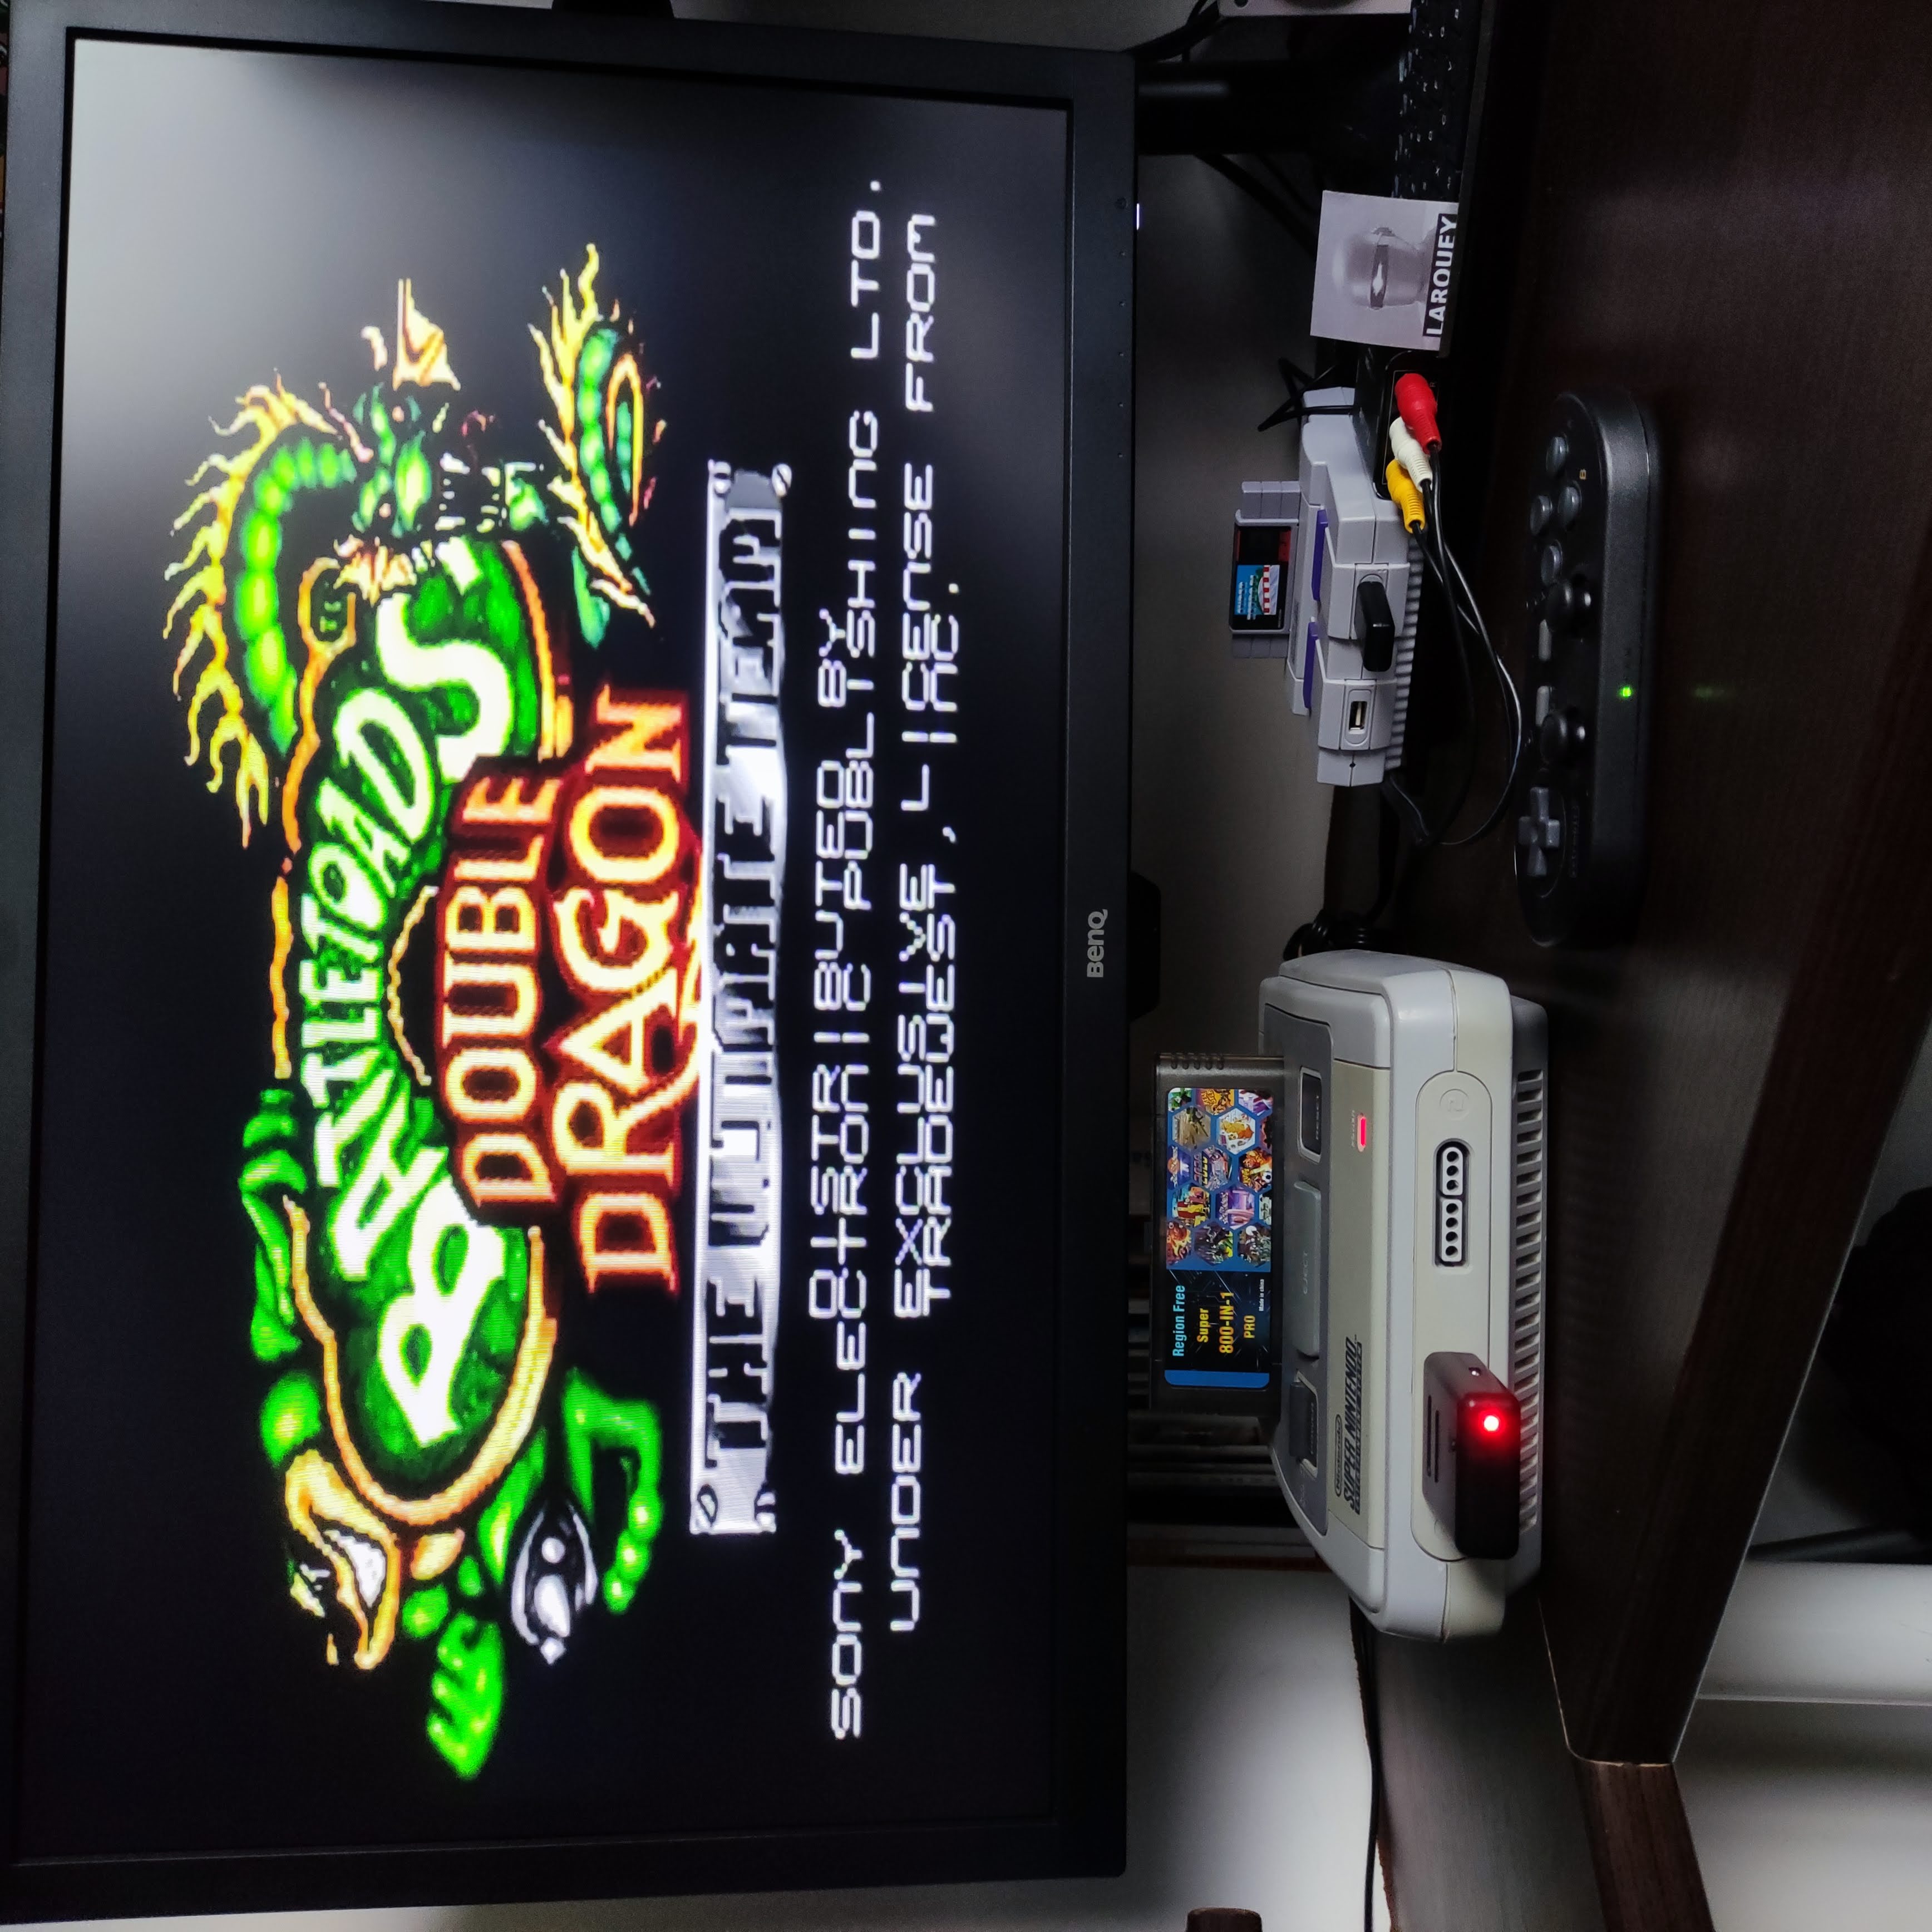 Larquey: Battletoads and Double Dragon: The Ultimate Team (SNES/Super Famicom) 60,000 points on 2022-09-15 02:03:02